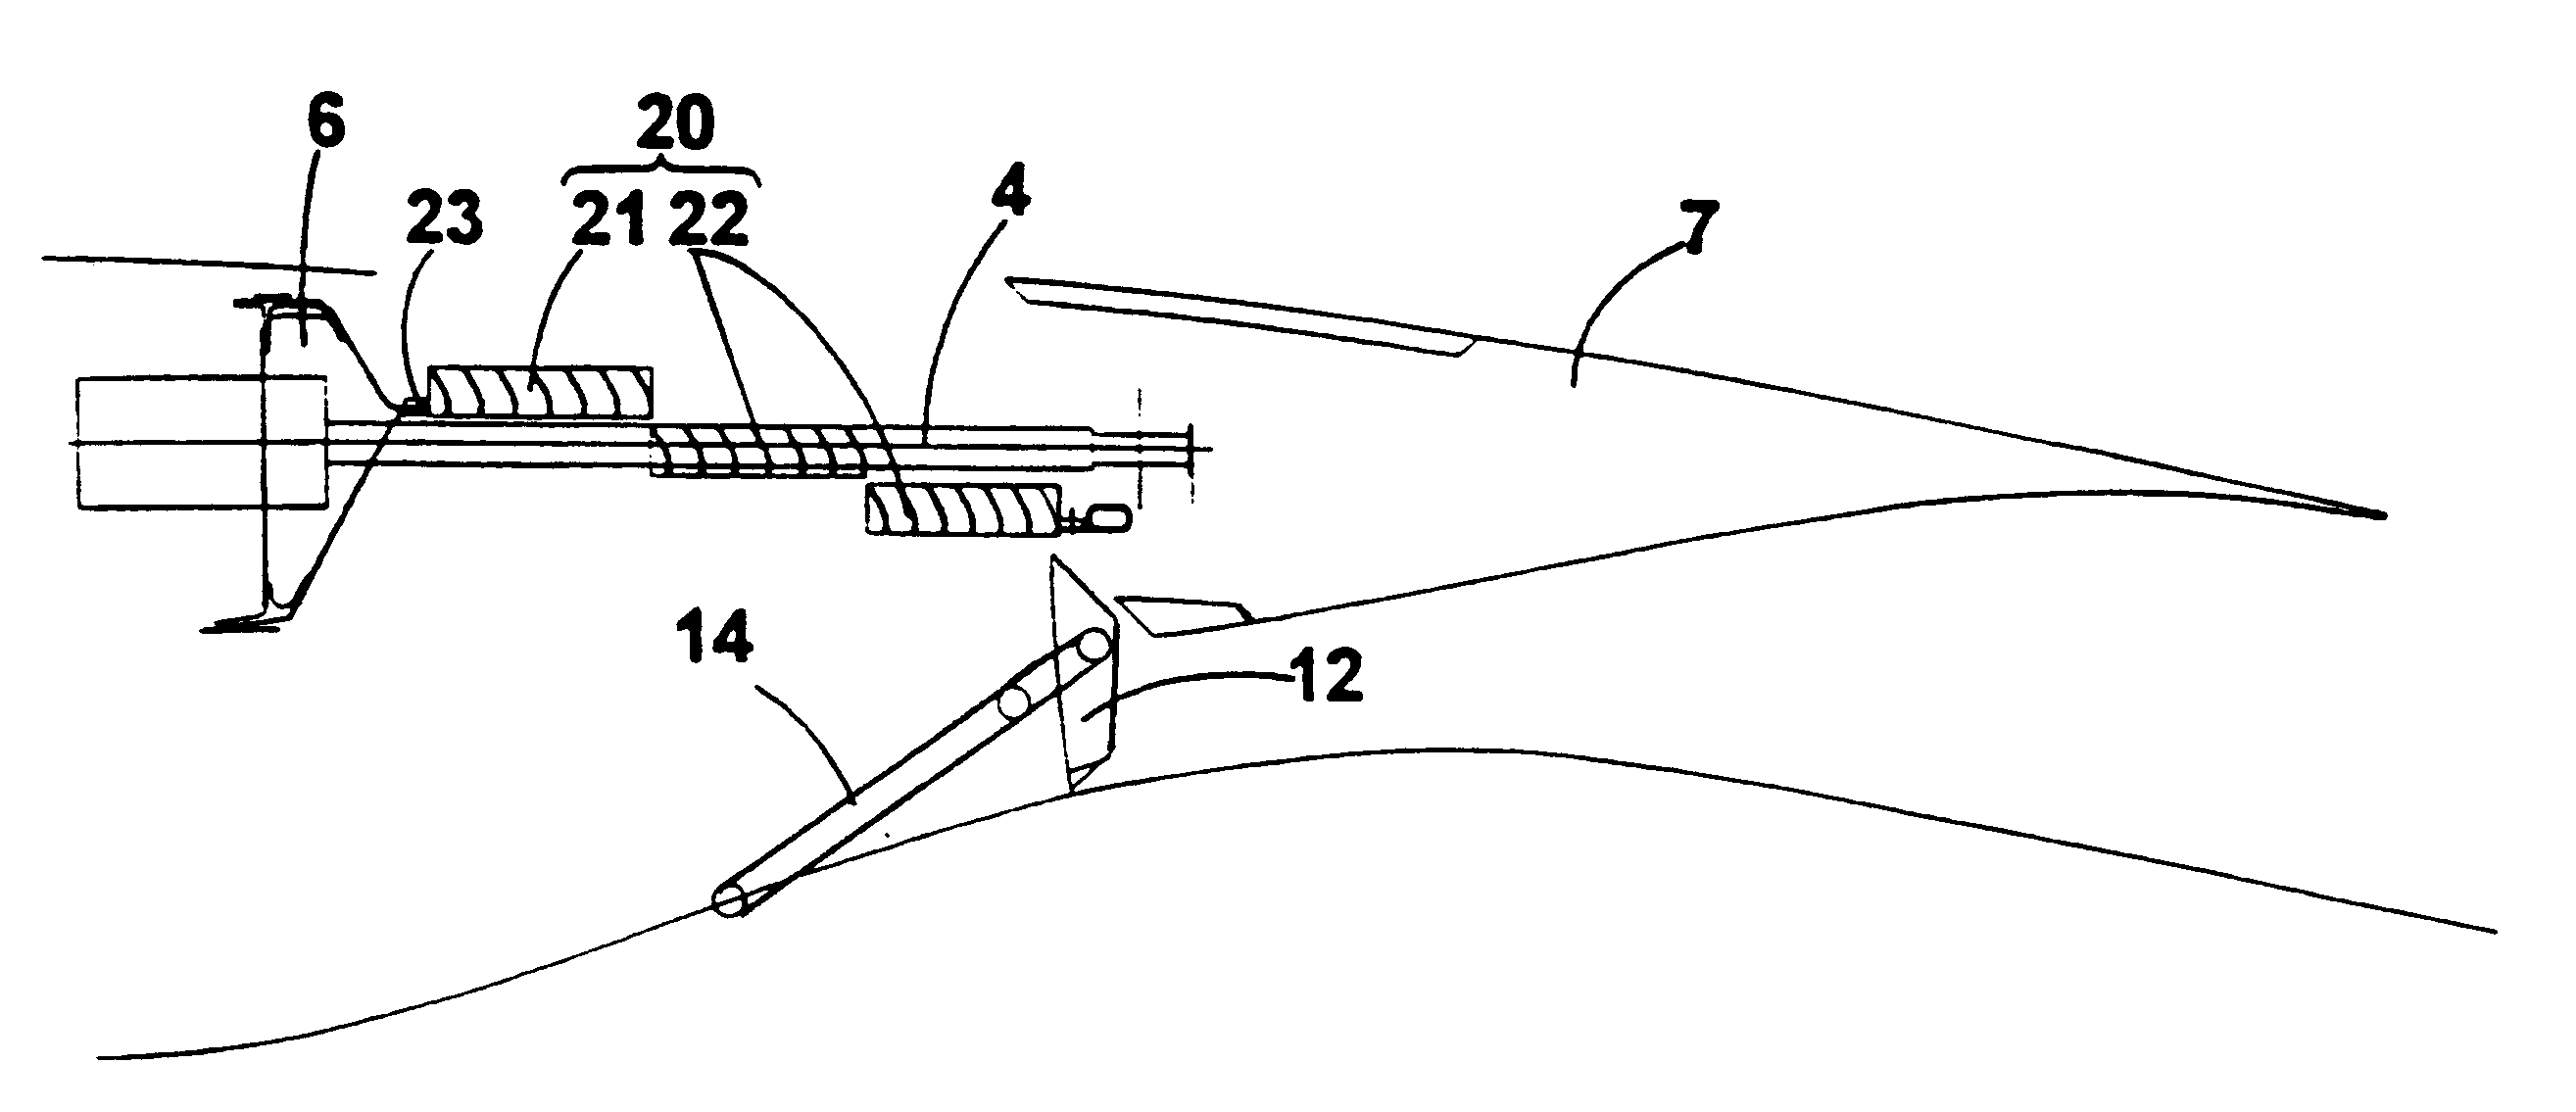 Thrust reverser with mutually configurable baffles